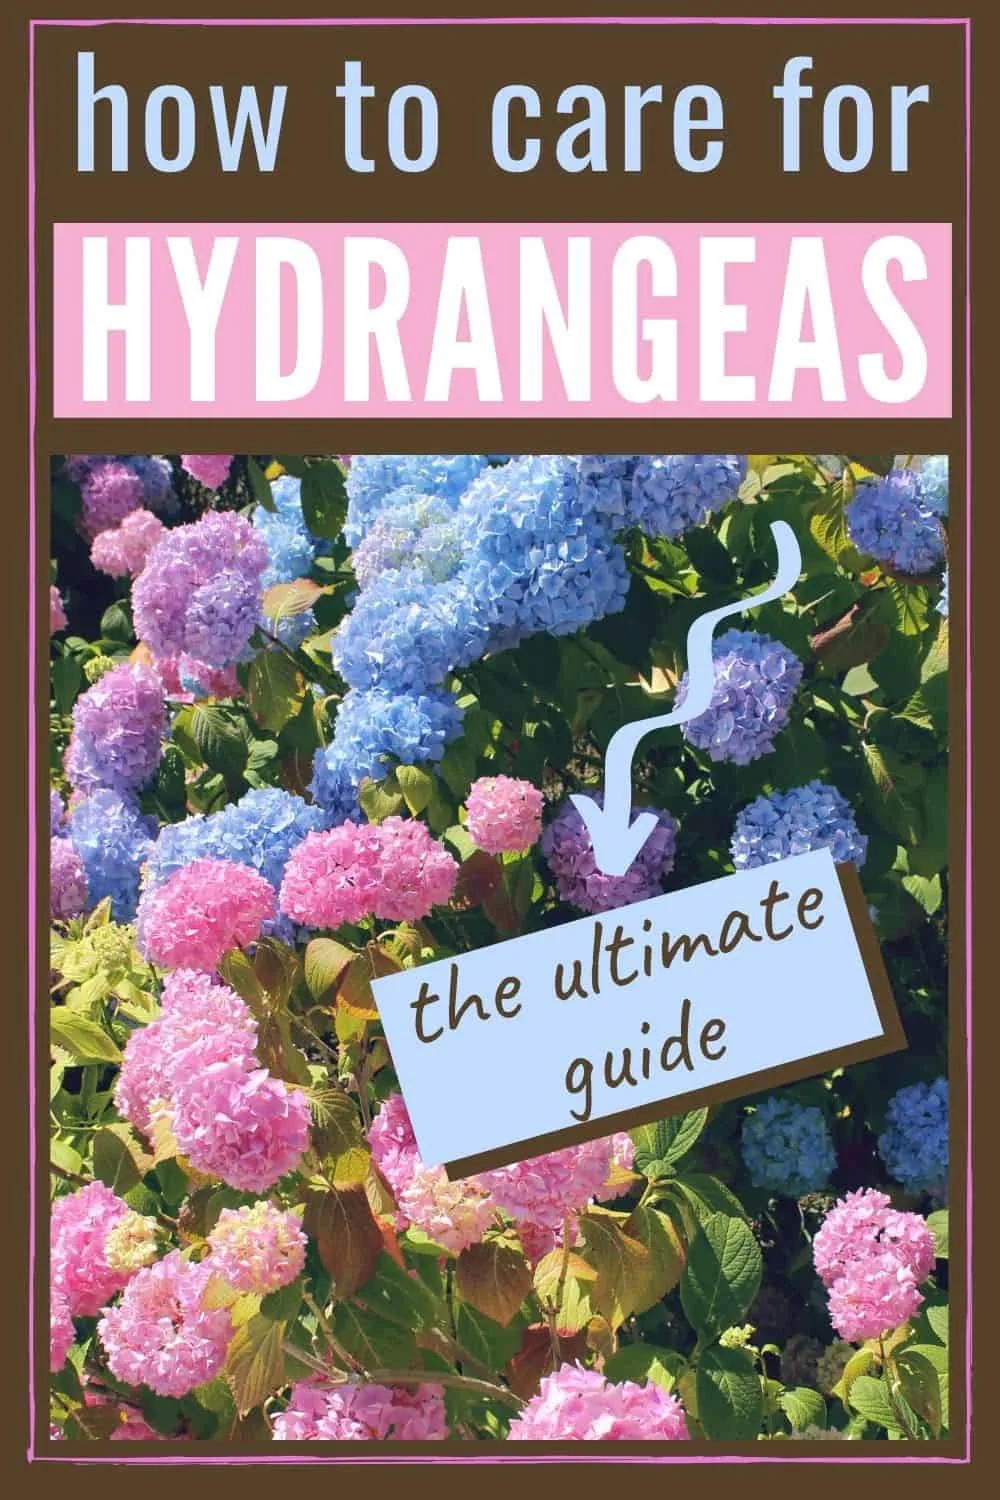 How to care for hydrangeas